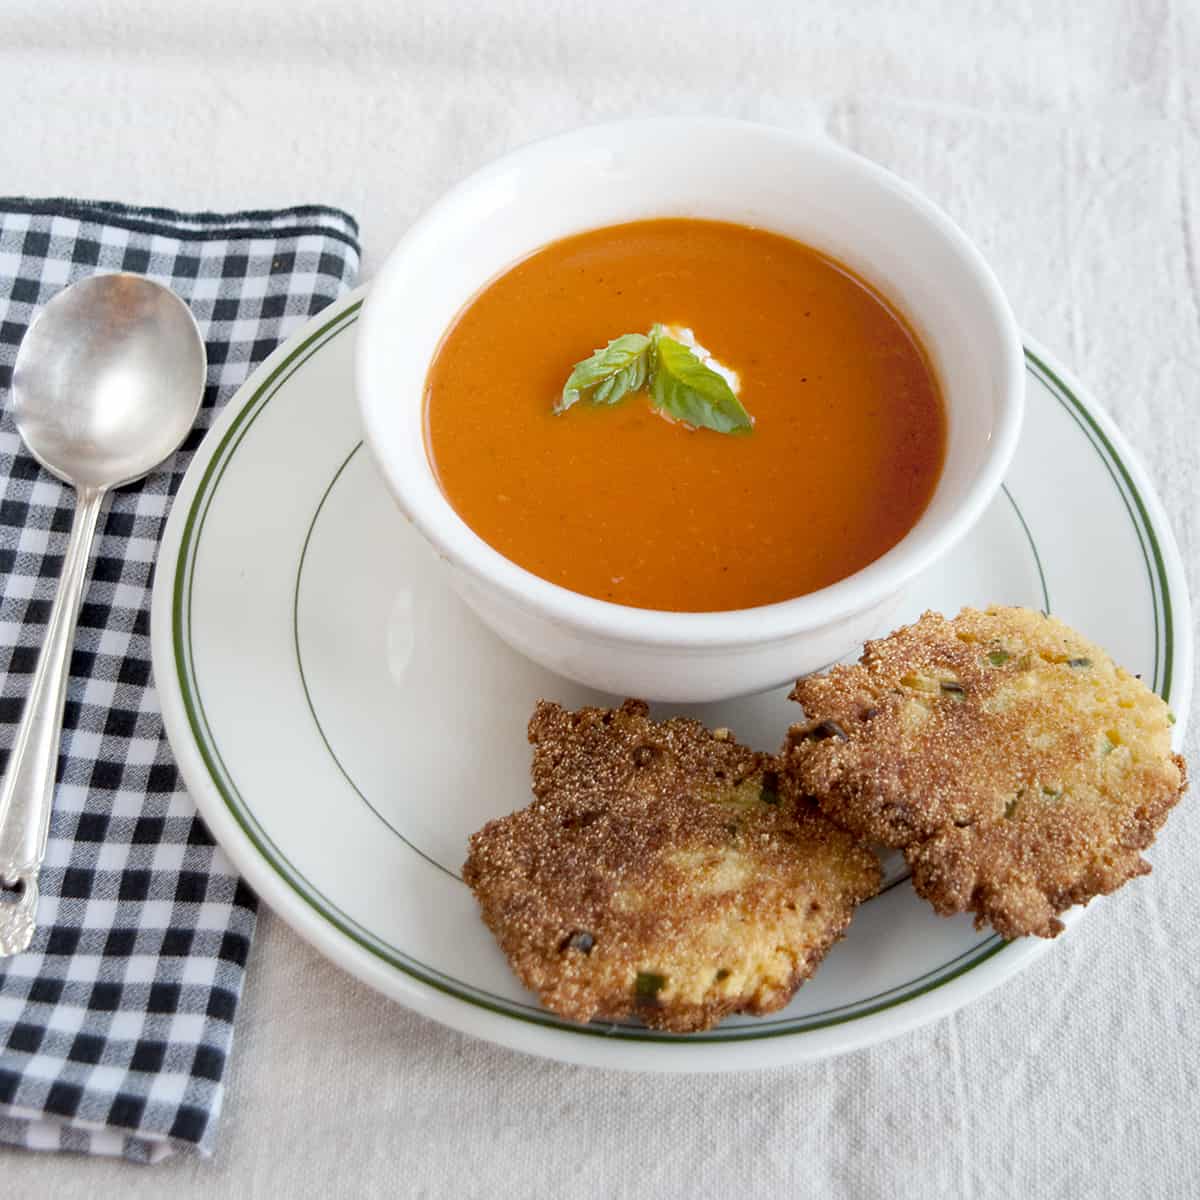 Tomato and Roasted Garlic Soup is a classic tomato soup recipe with the addition of roasted garlic. Perfect for dipping with a grilled cheese sandwich. https://www.lanascooking.com/tomato-roasted-garlic-soup